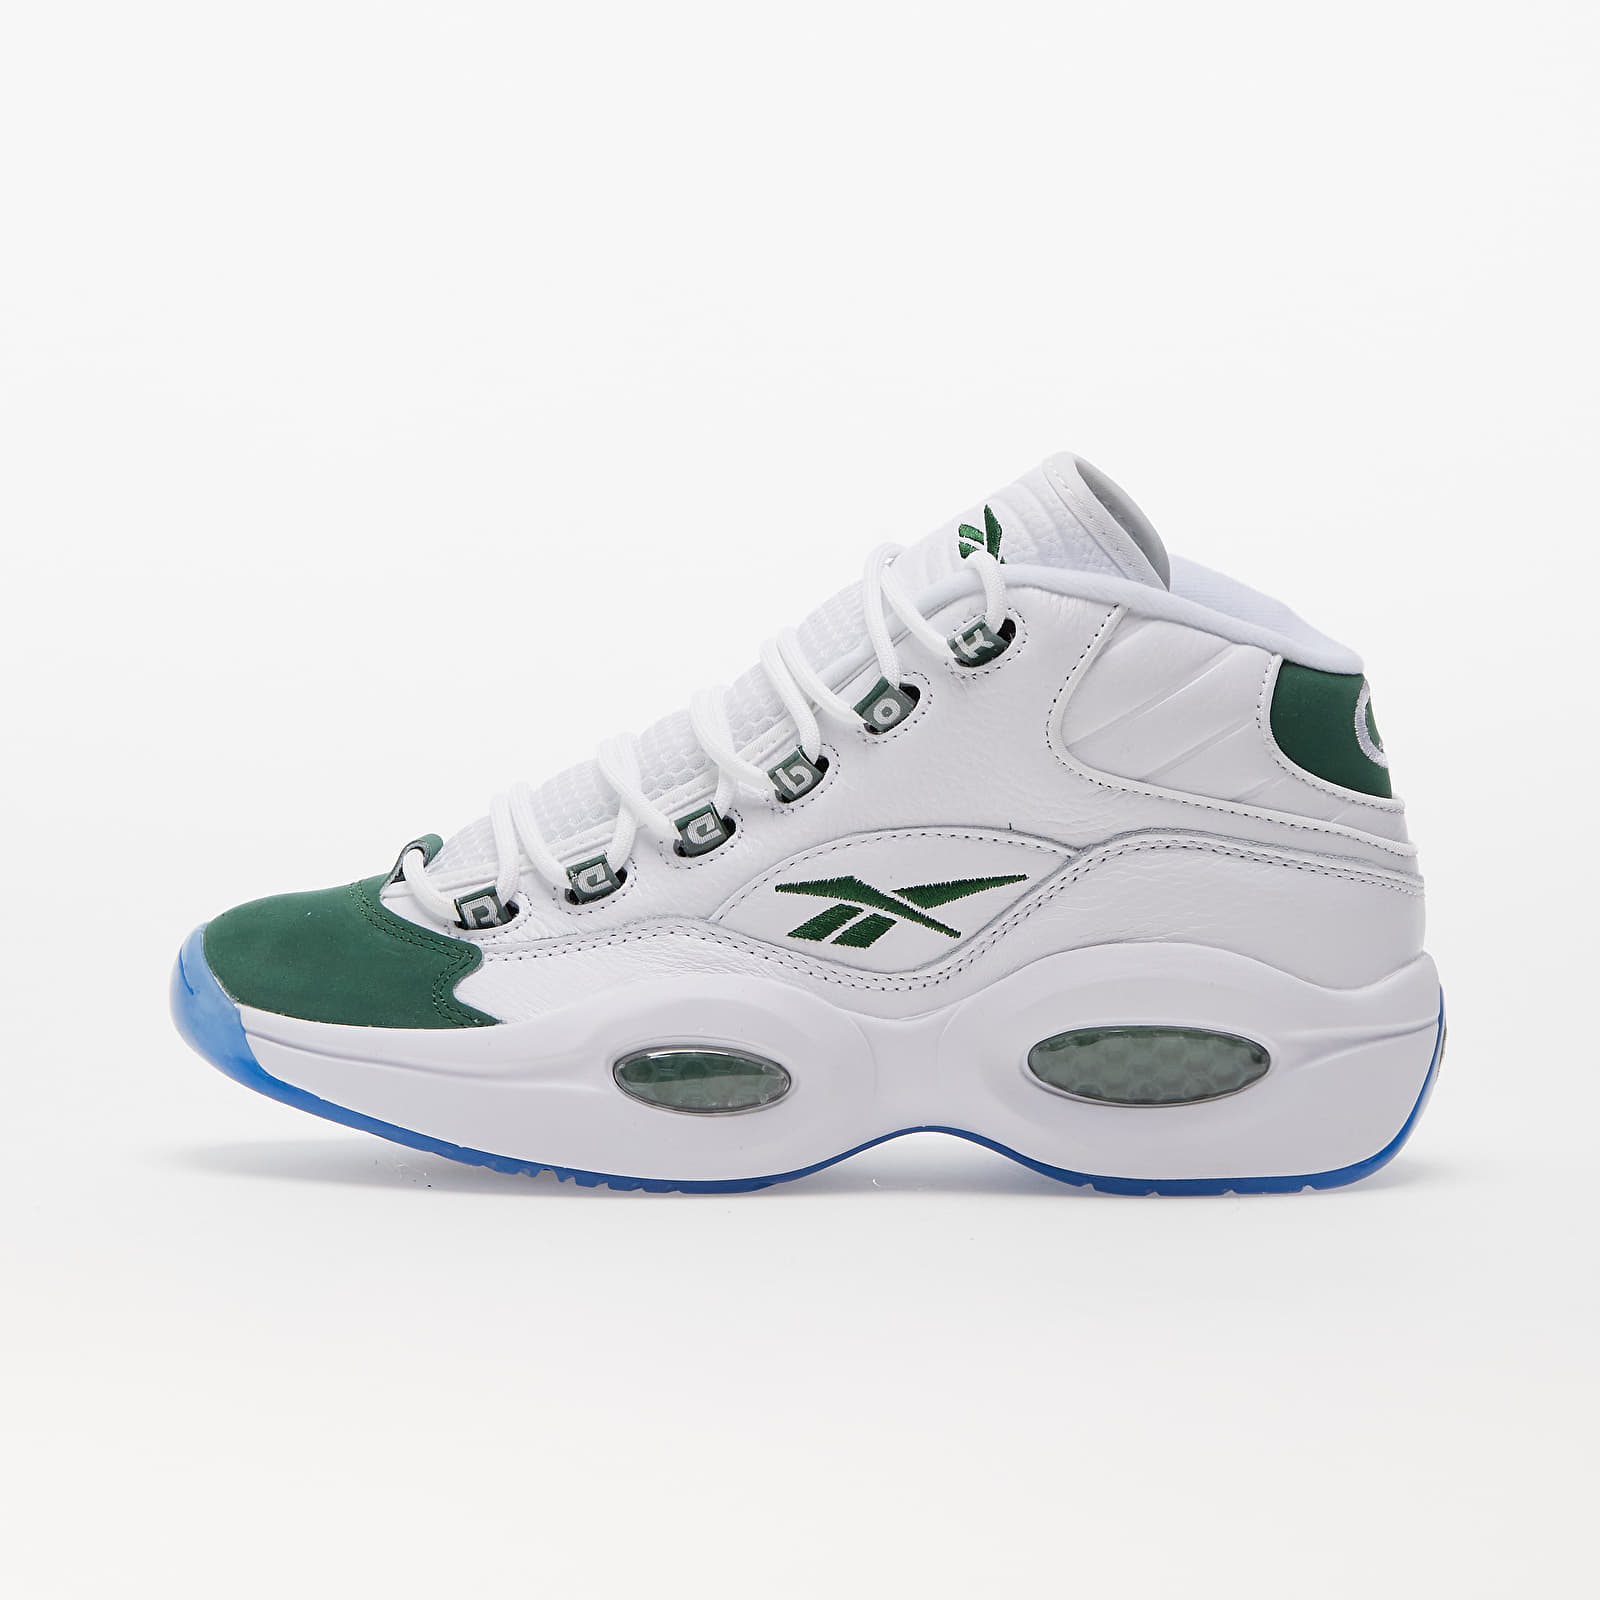 Men's shoes Reebok Question Mid Ftw White/ Pine Green/ Ftw White